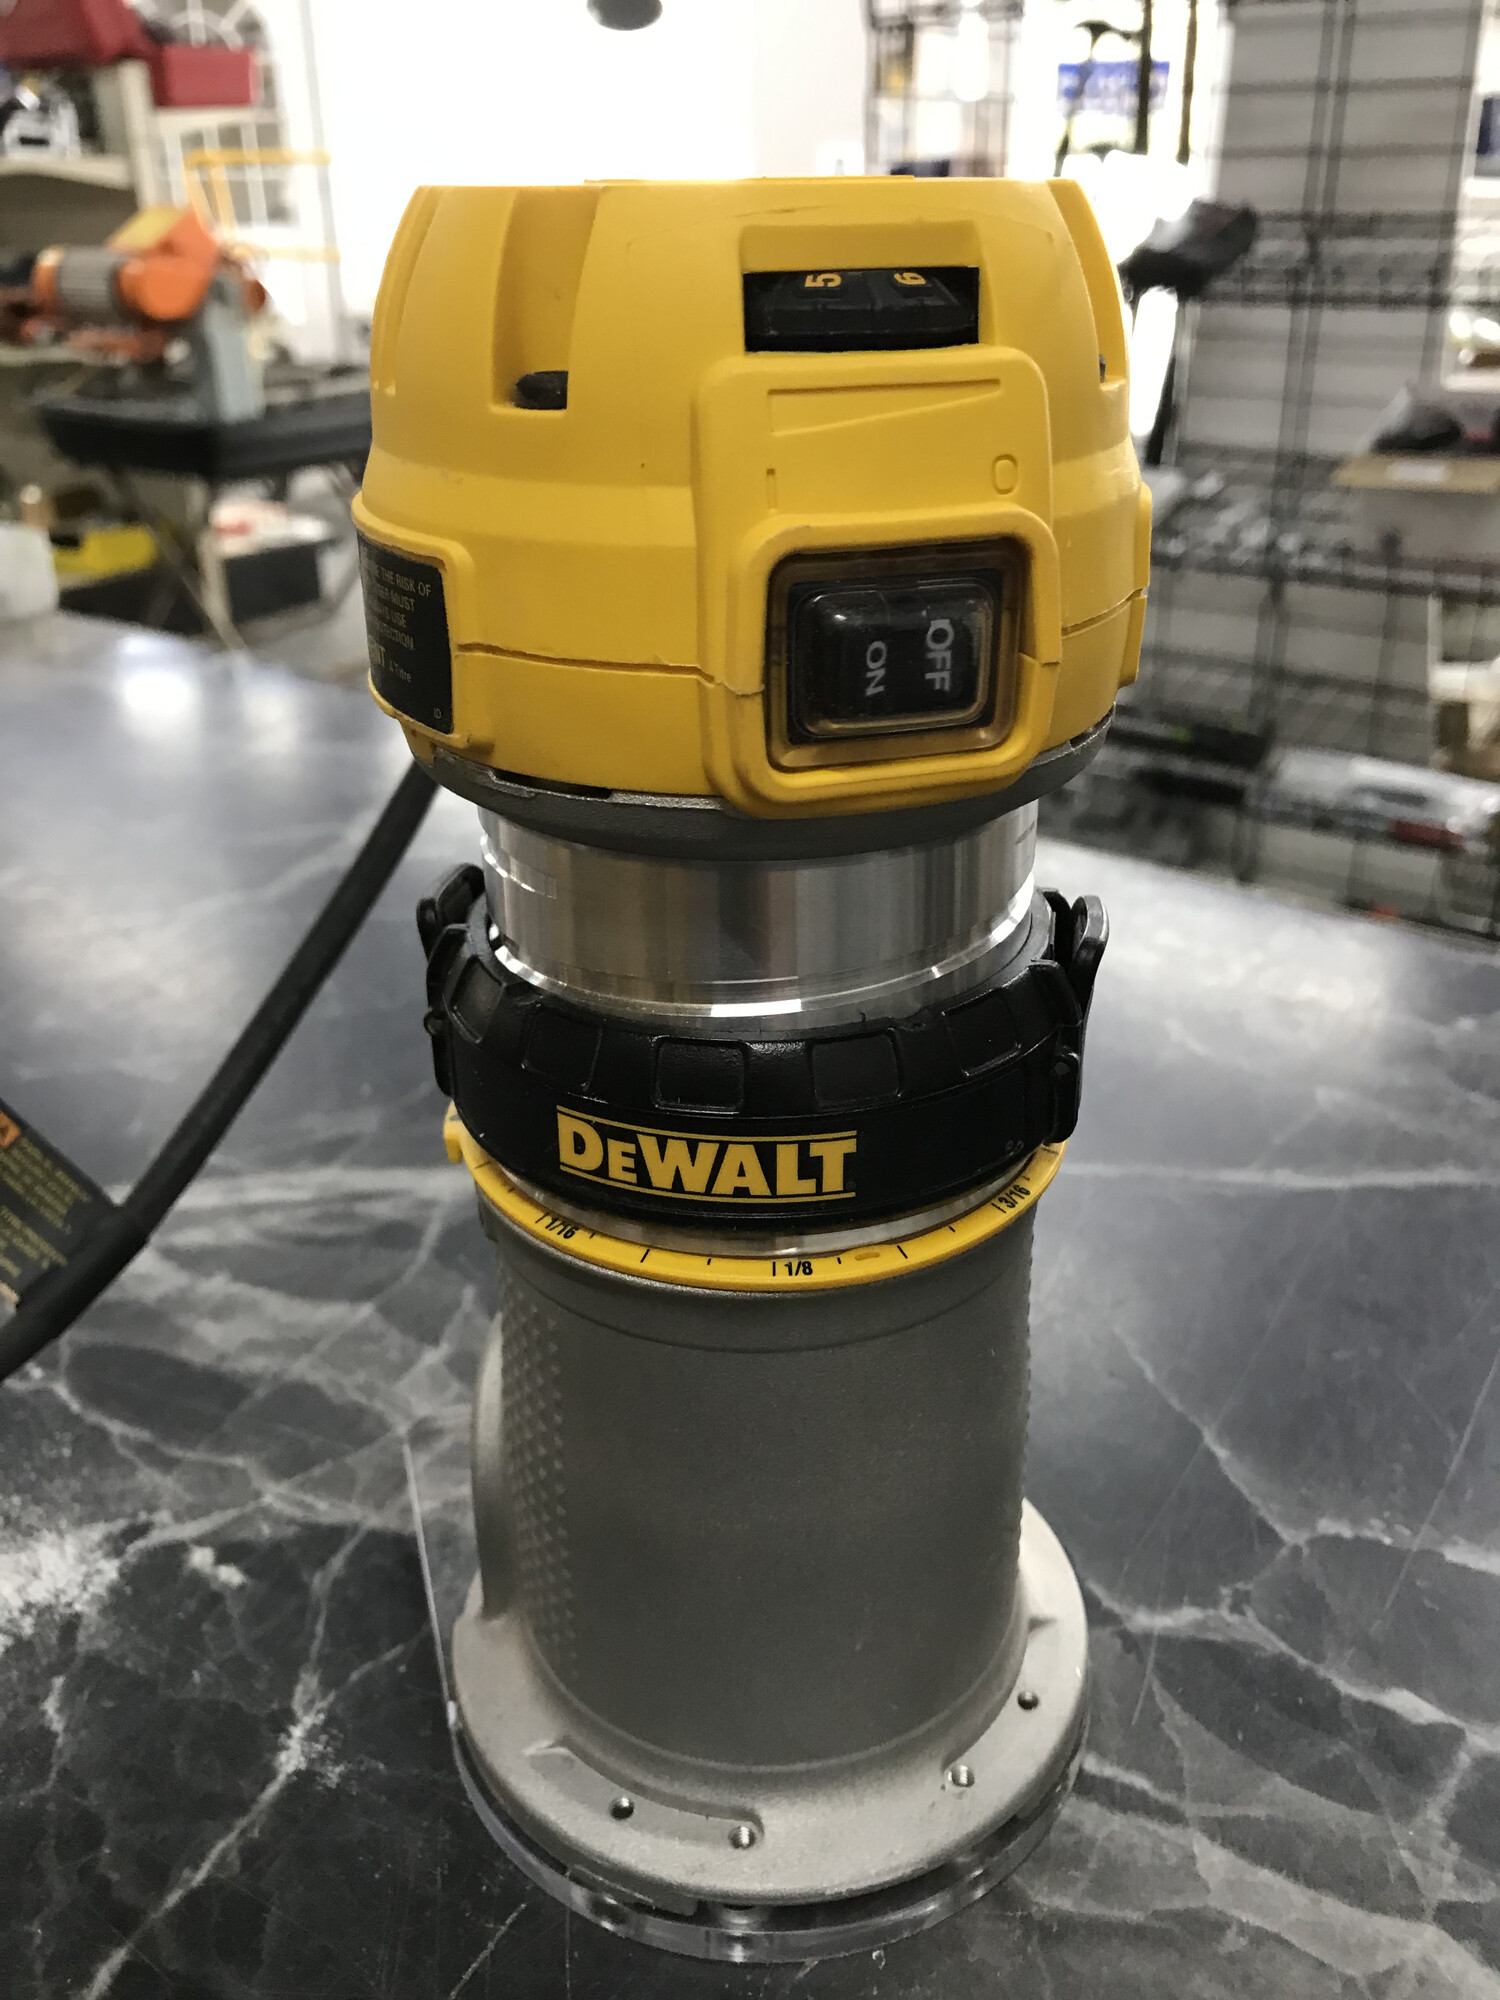 Compact Router, DeWalt  DWP611

Like New condition